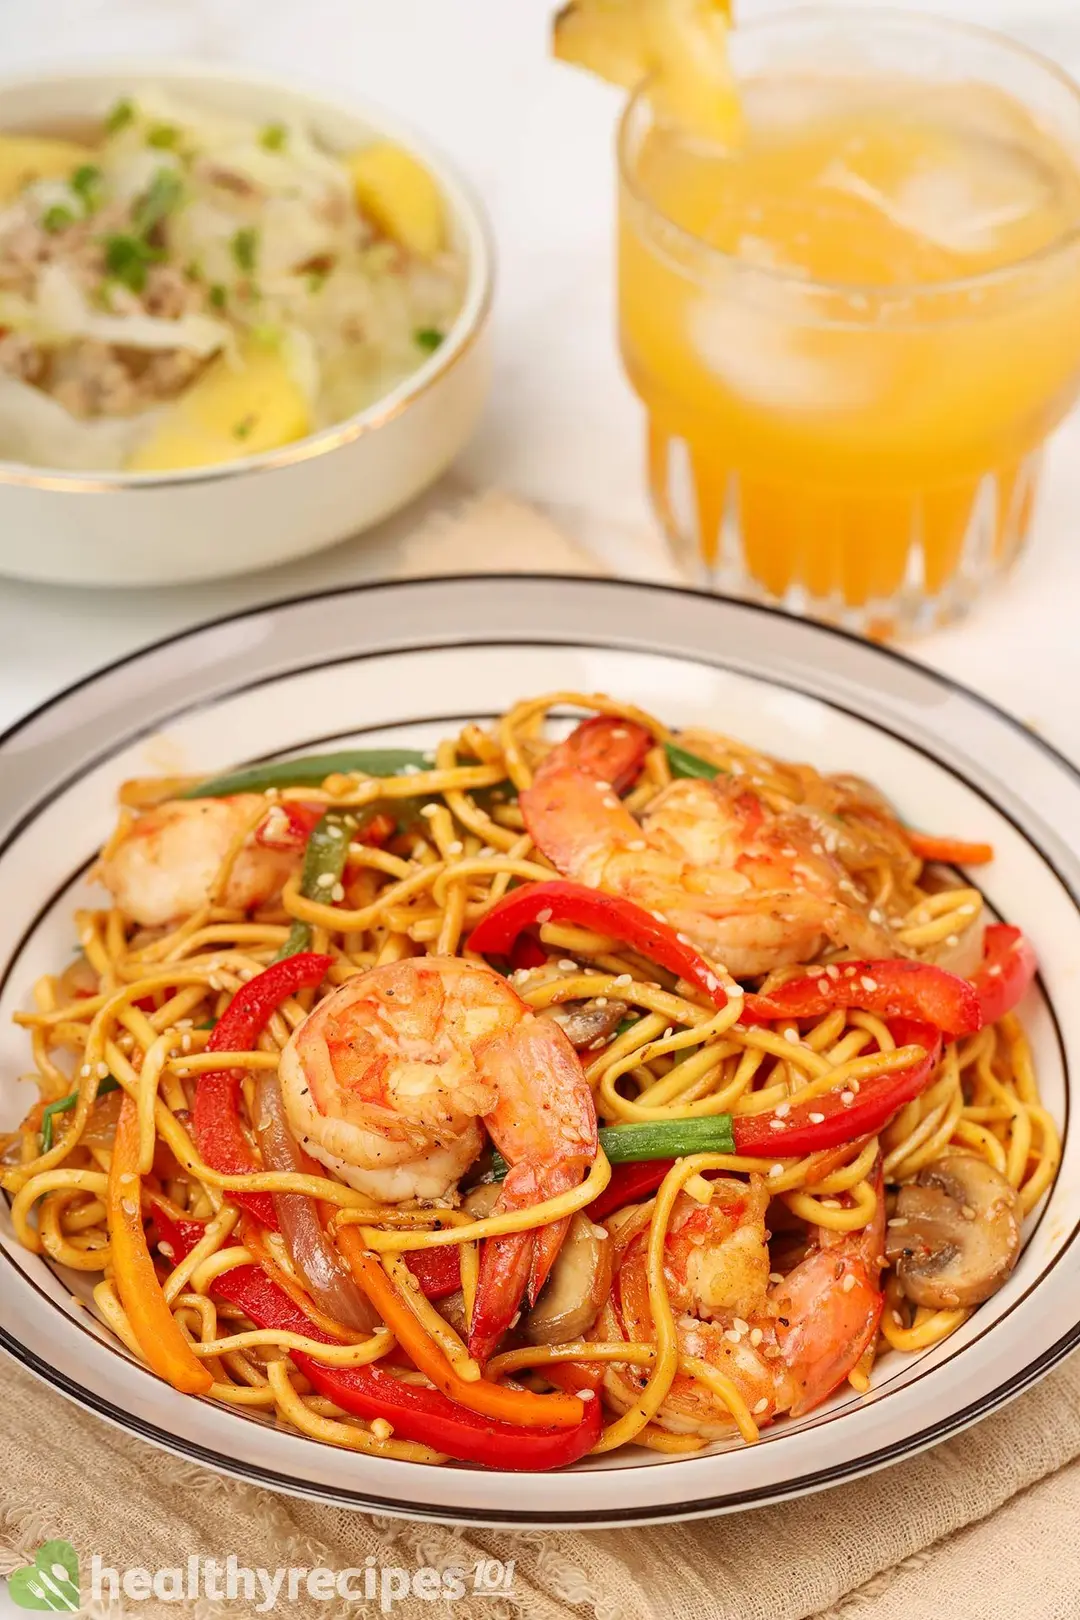 What to Serve With Shrimp Lo Mein